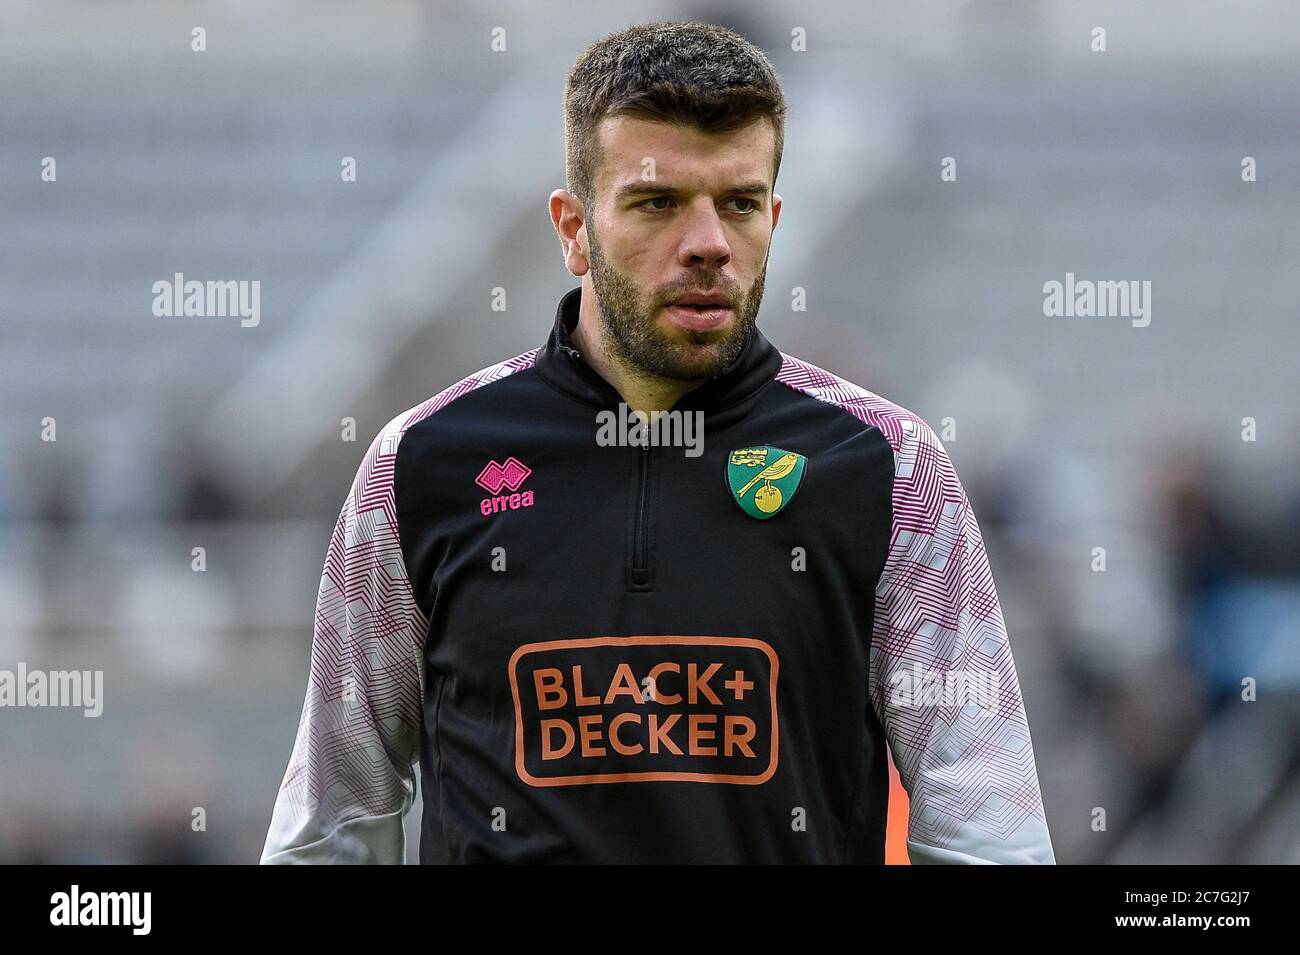 1st February 2020, St. James's Park, Newcastle, England; Premier League, Newcastle United v Norwich City : Ex-Newcastle United player Grant Hanley (5) of Norwich City during the pre-game warmup Stock Photo